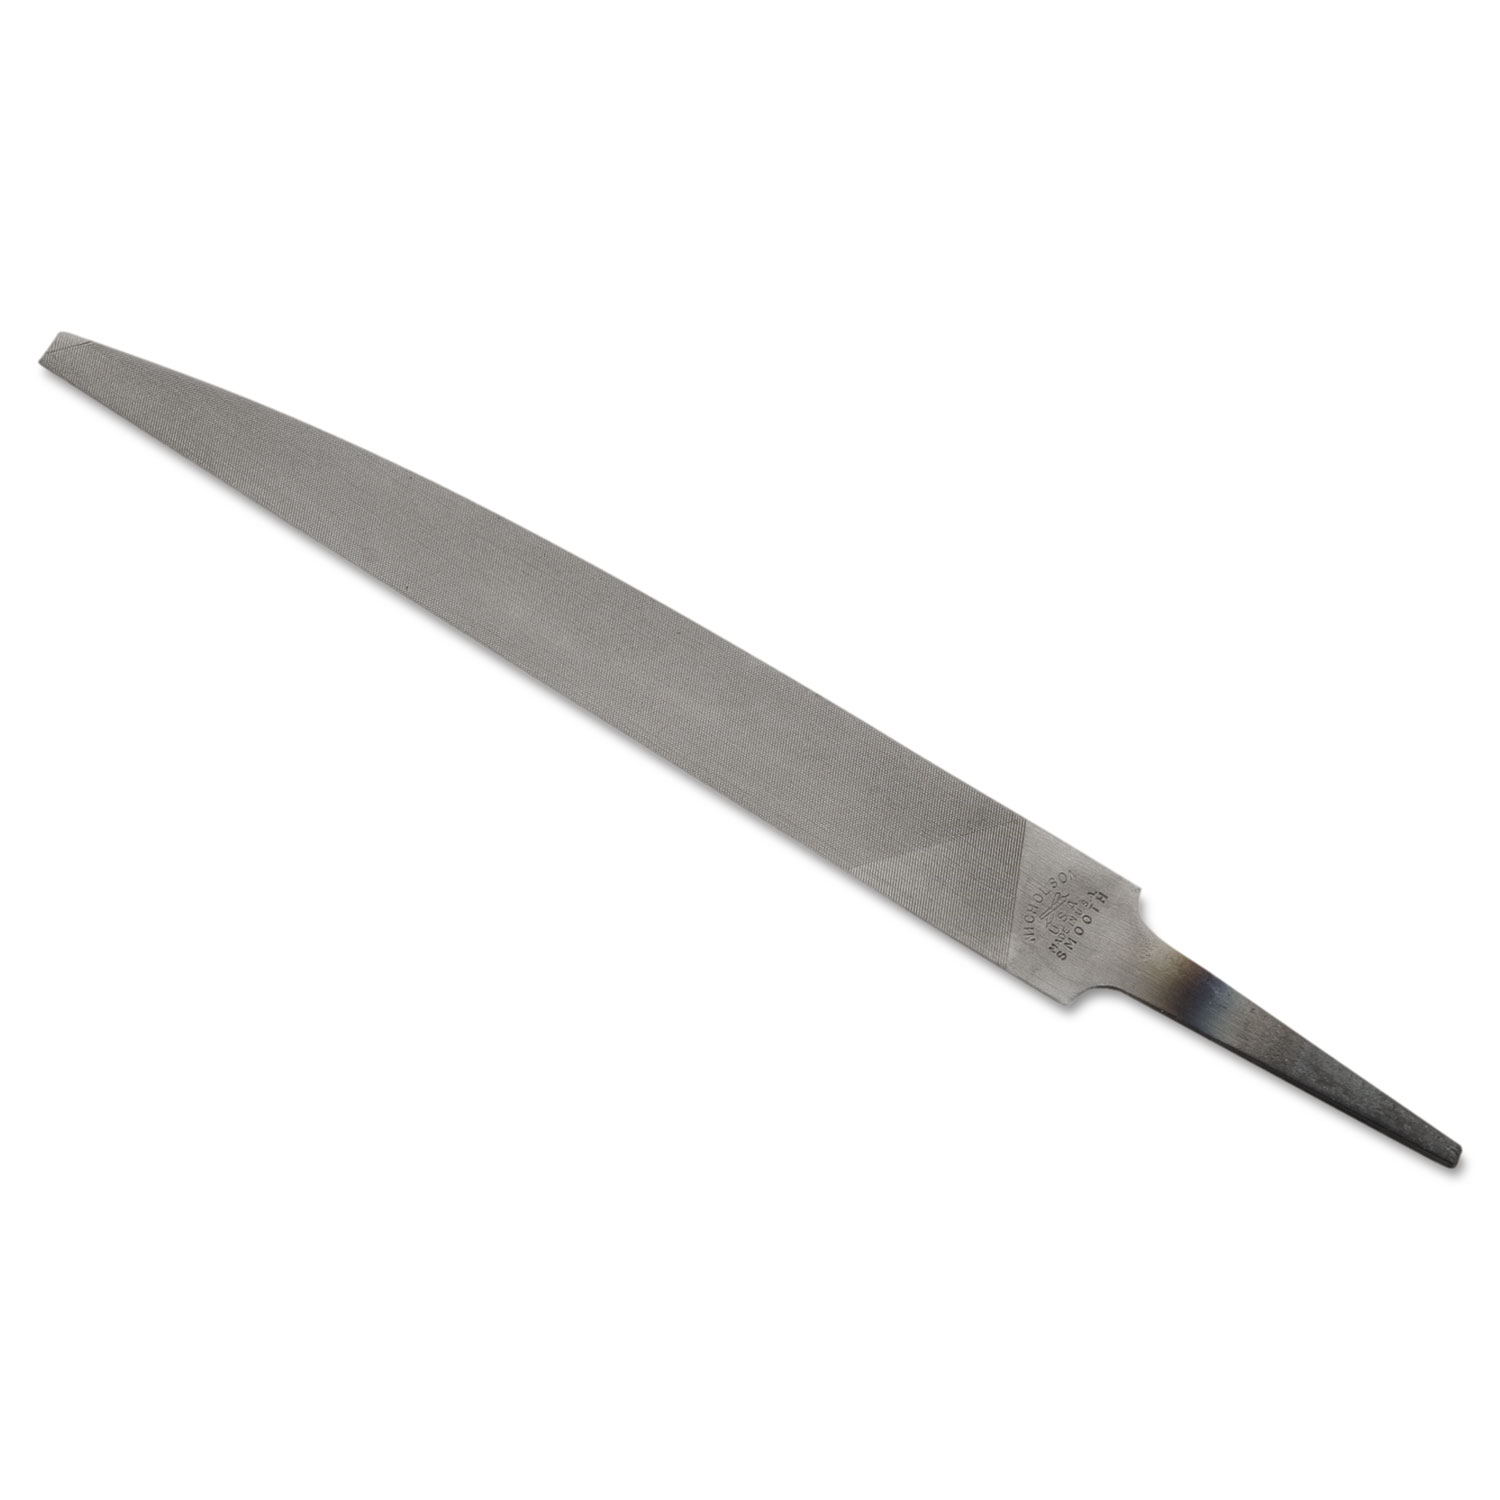 Machinists Triangular Boxed Knife File, 6in